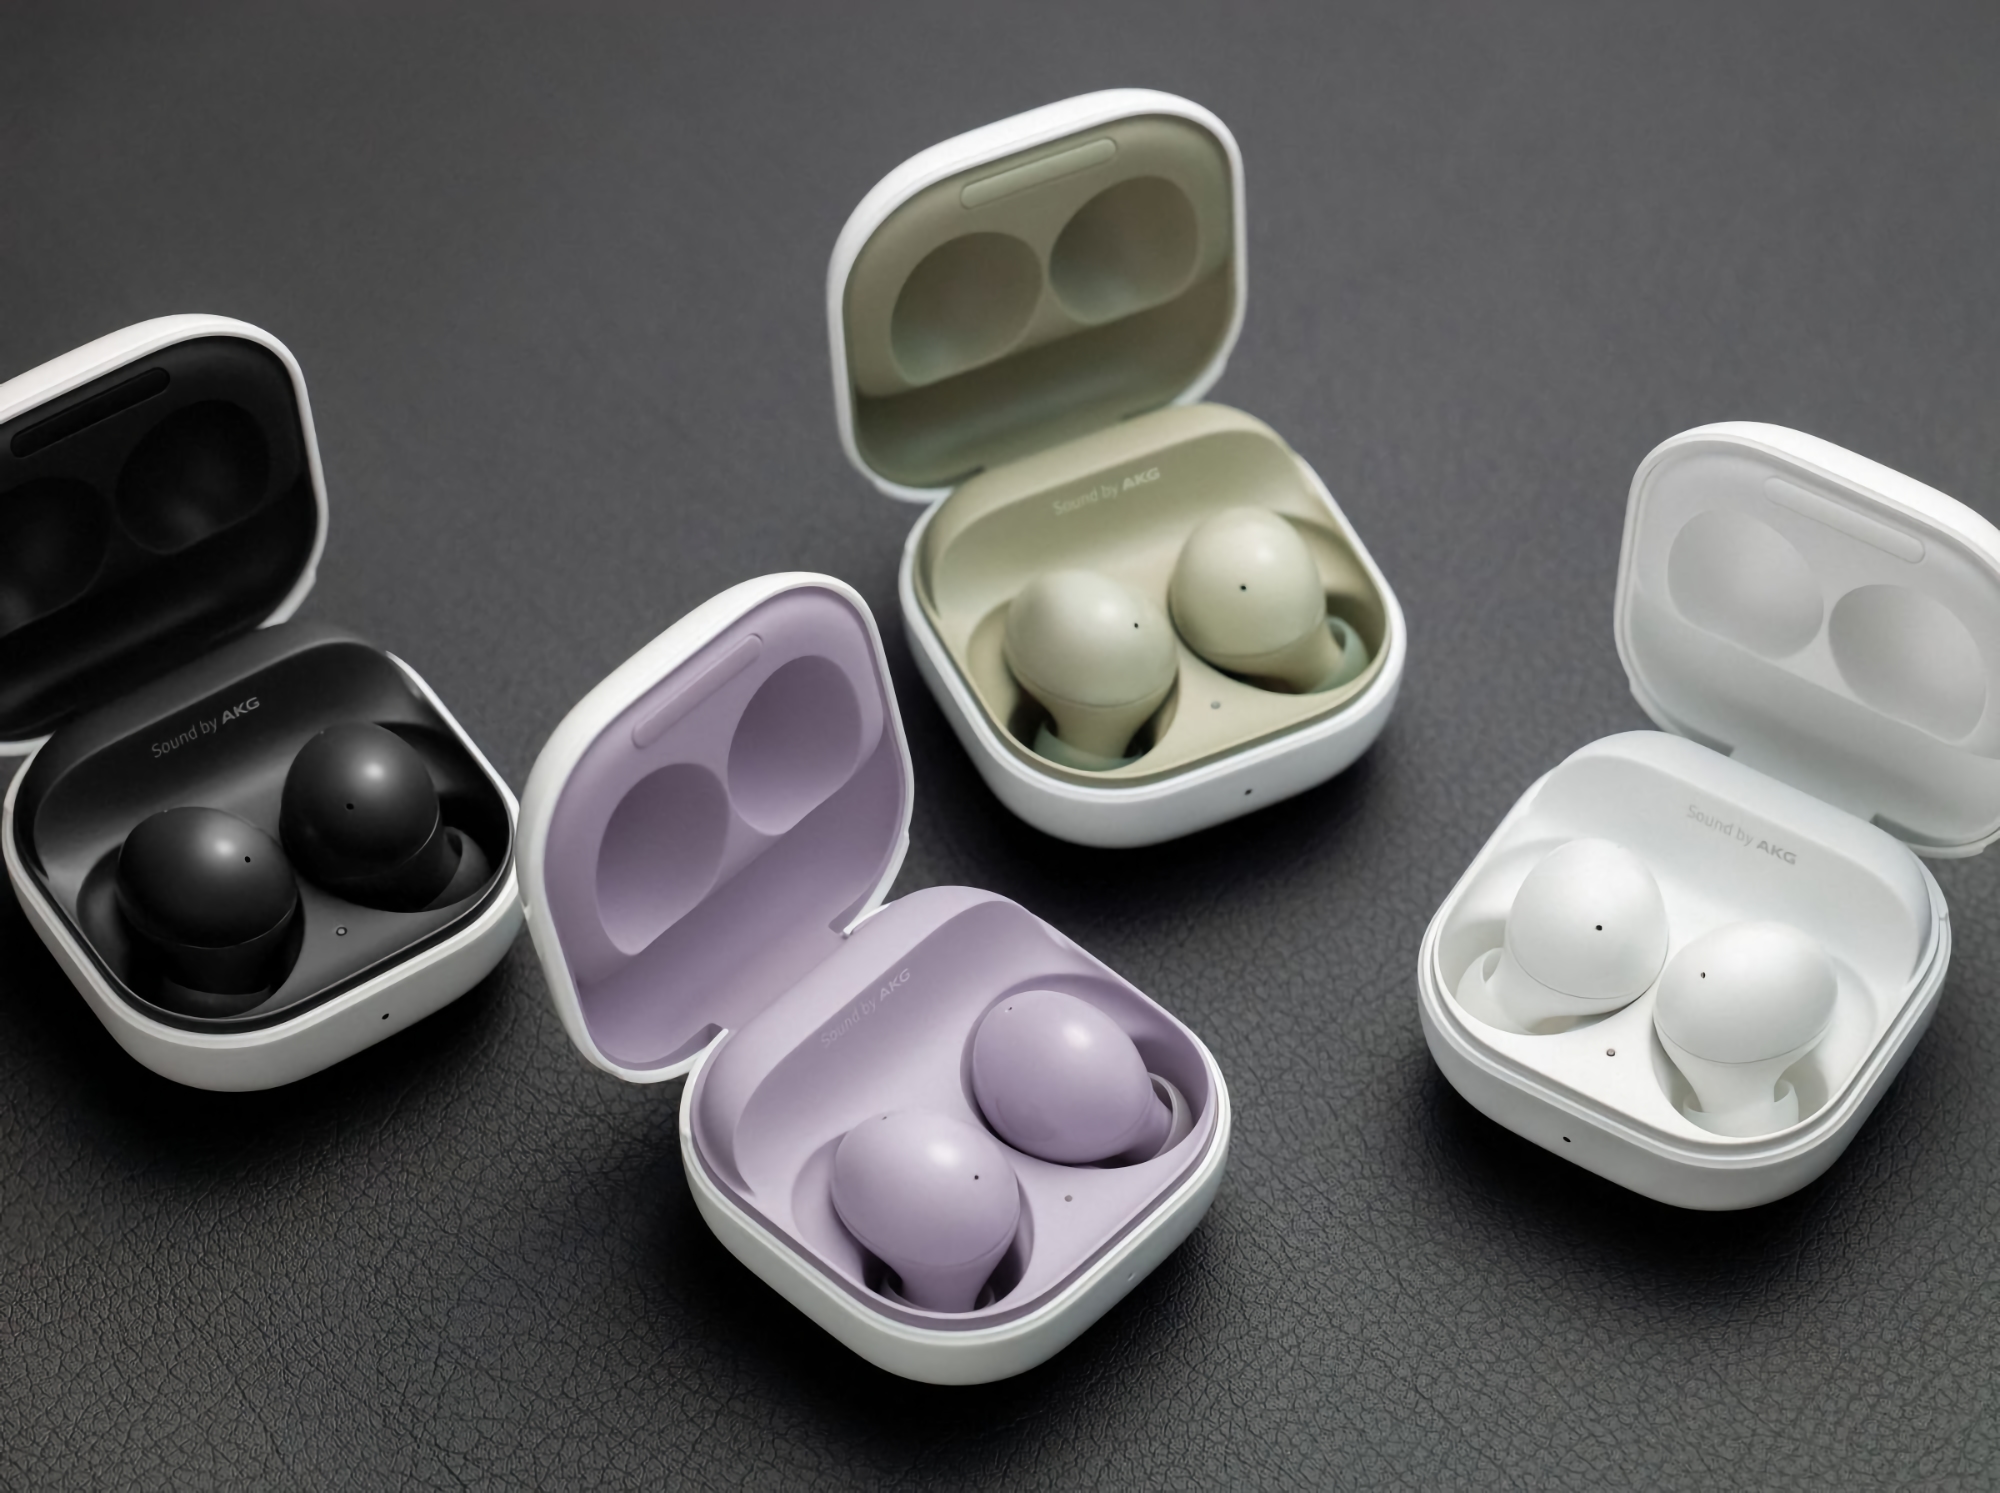 Samsung Galaxy Buds Pro and Galaxy Buds 2 have a new software version